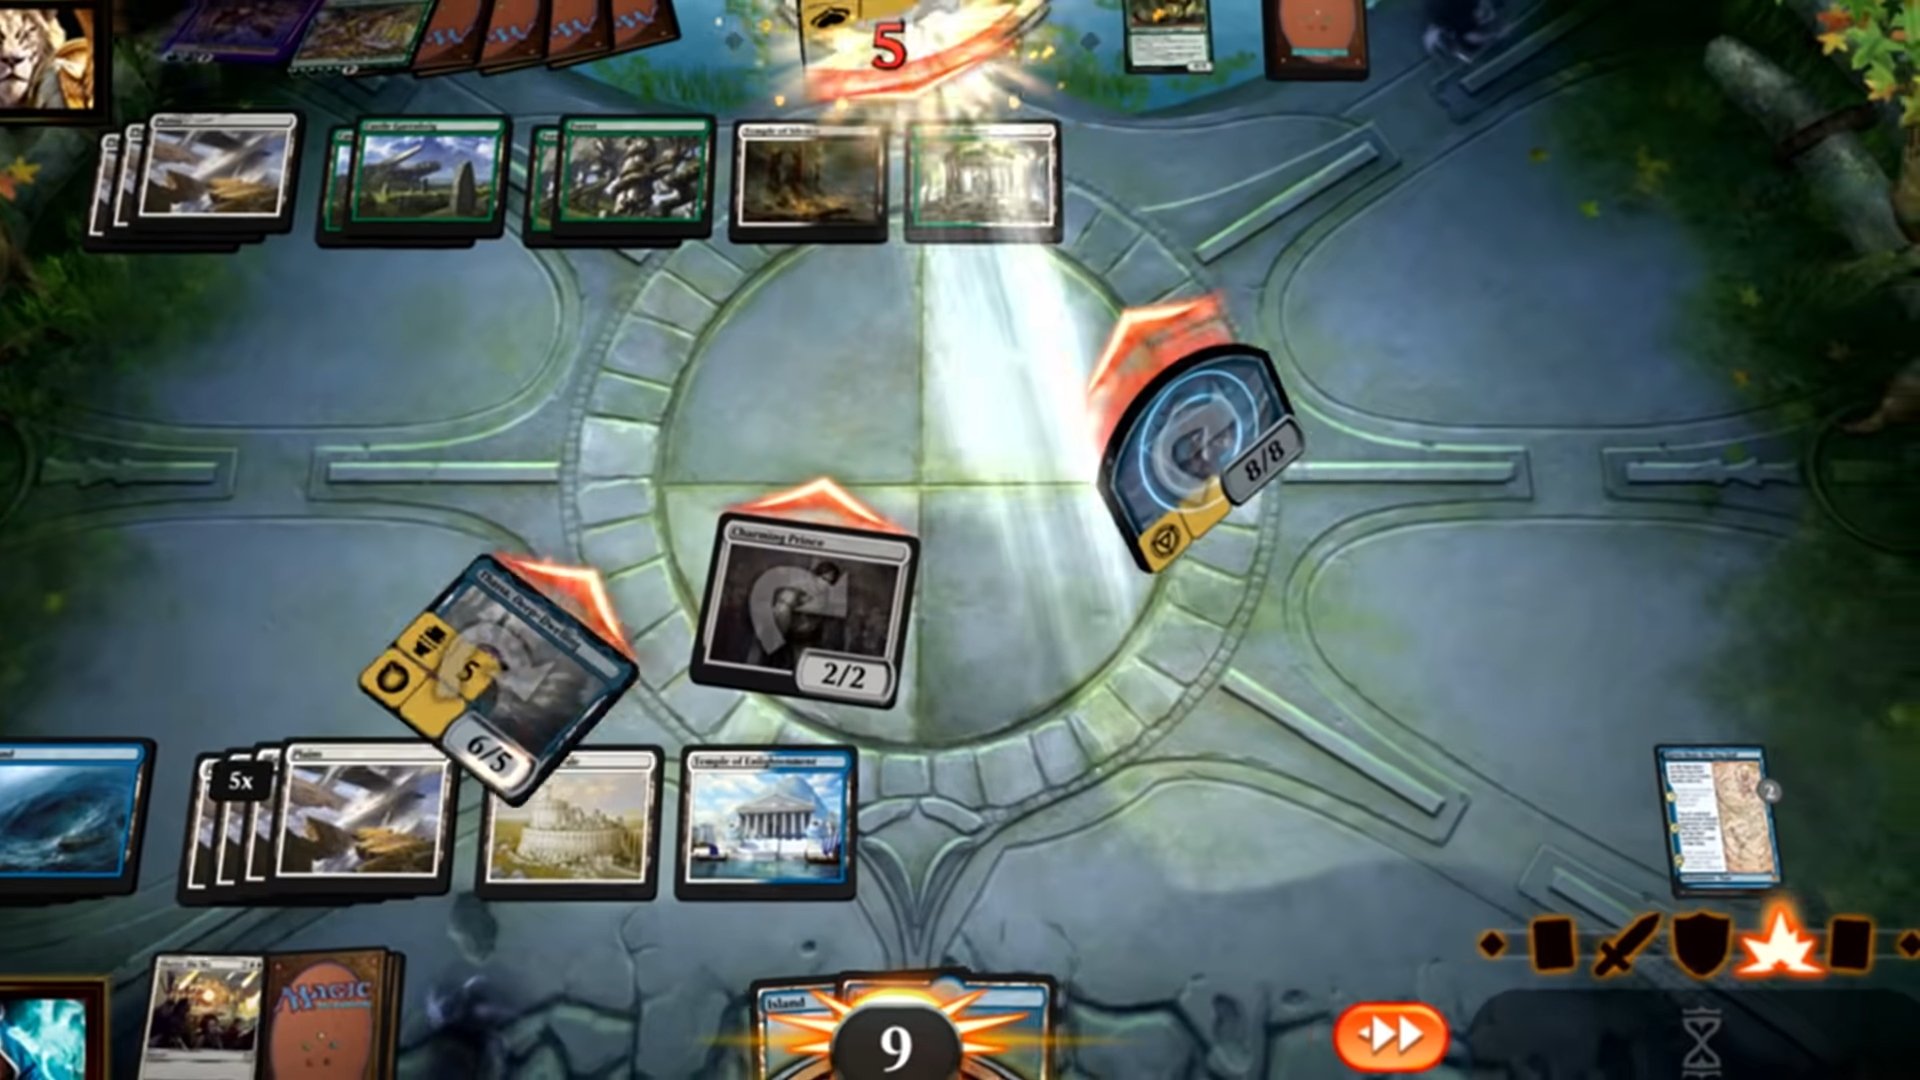 Free card games online - Magic: The Gathering Arena. A screenshot shows cards moving around the table amidst a game.